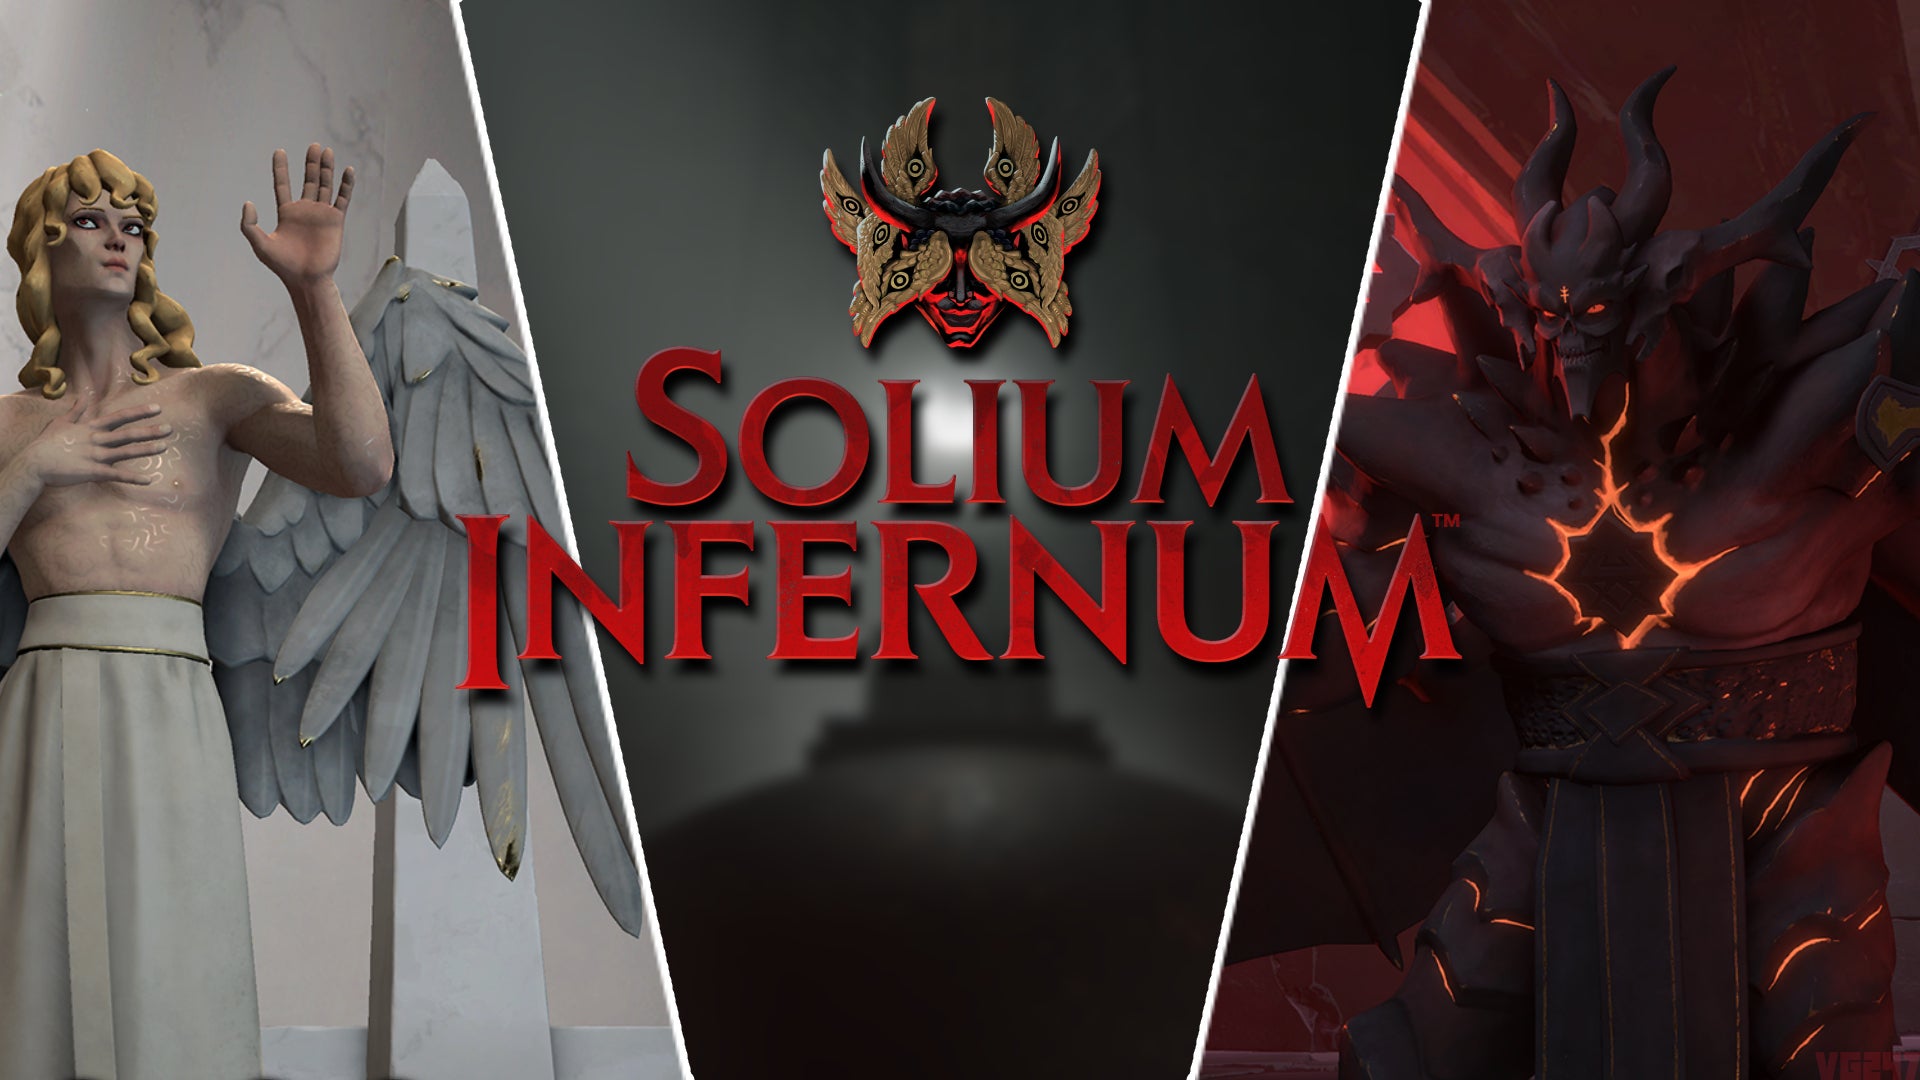 Image for Solium Infernum returns from Hell as League of Geeks announces new title for 2023 release date